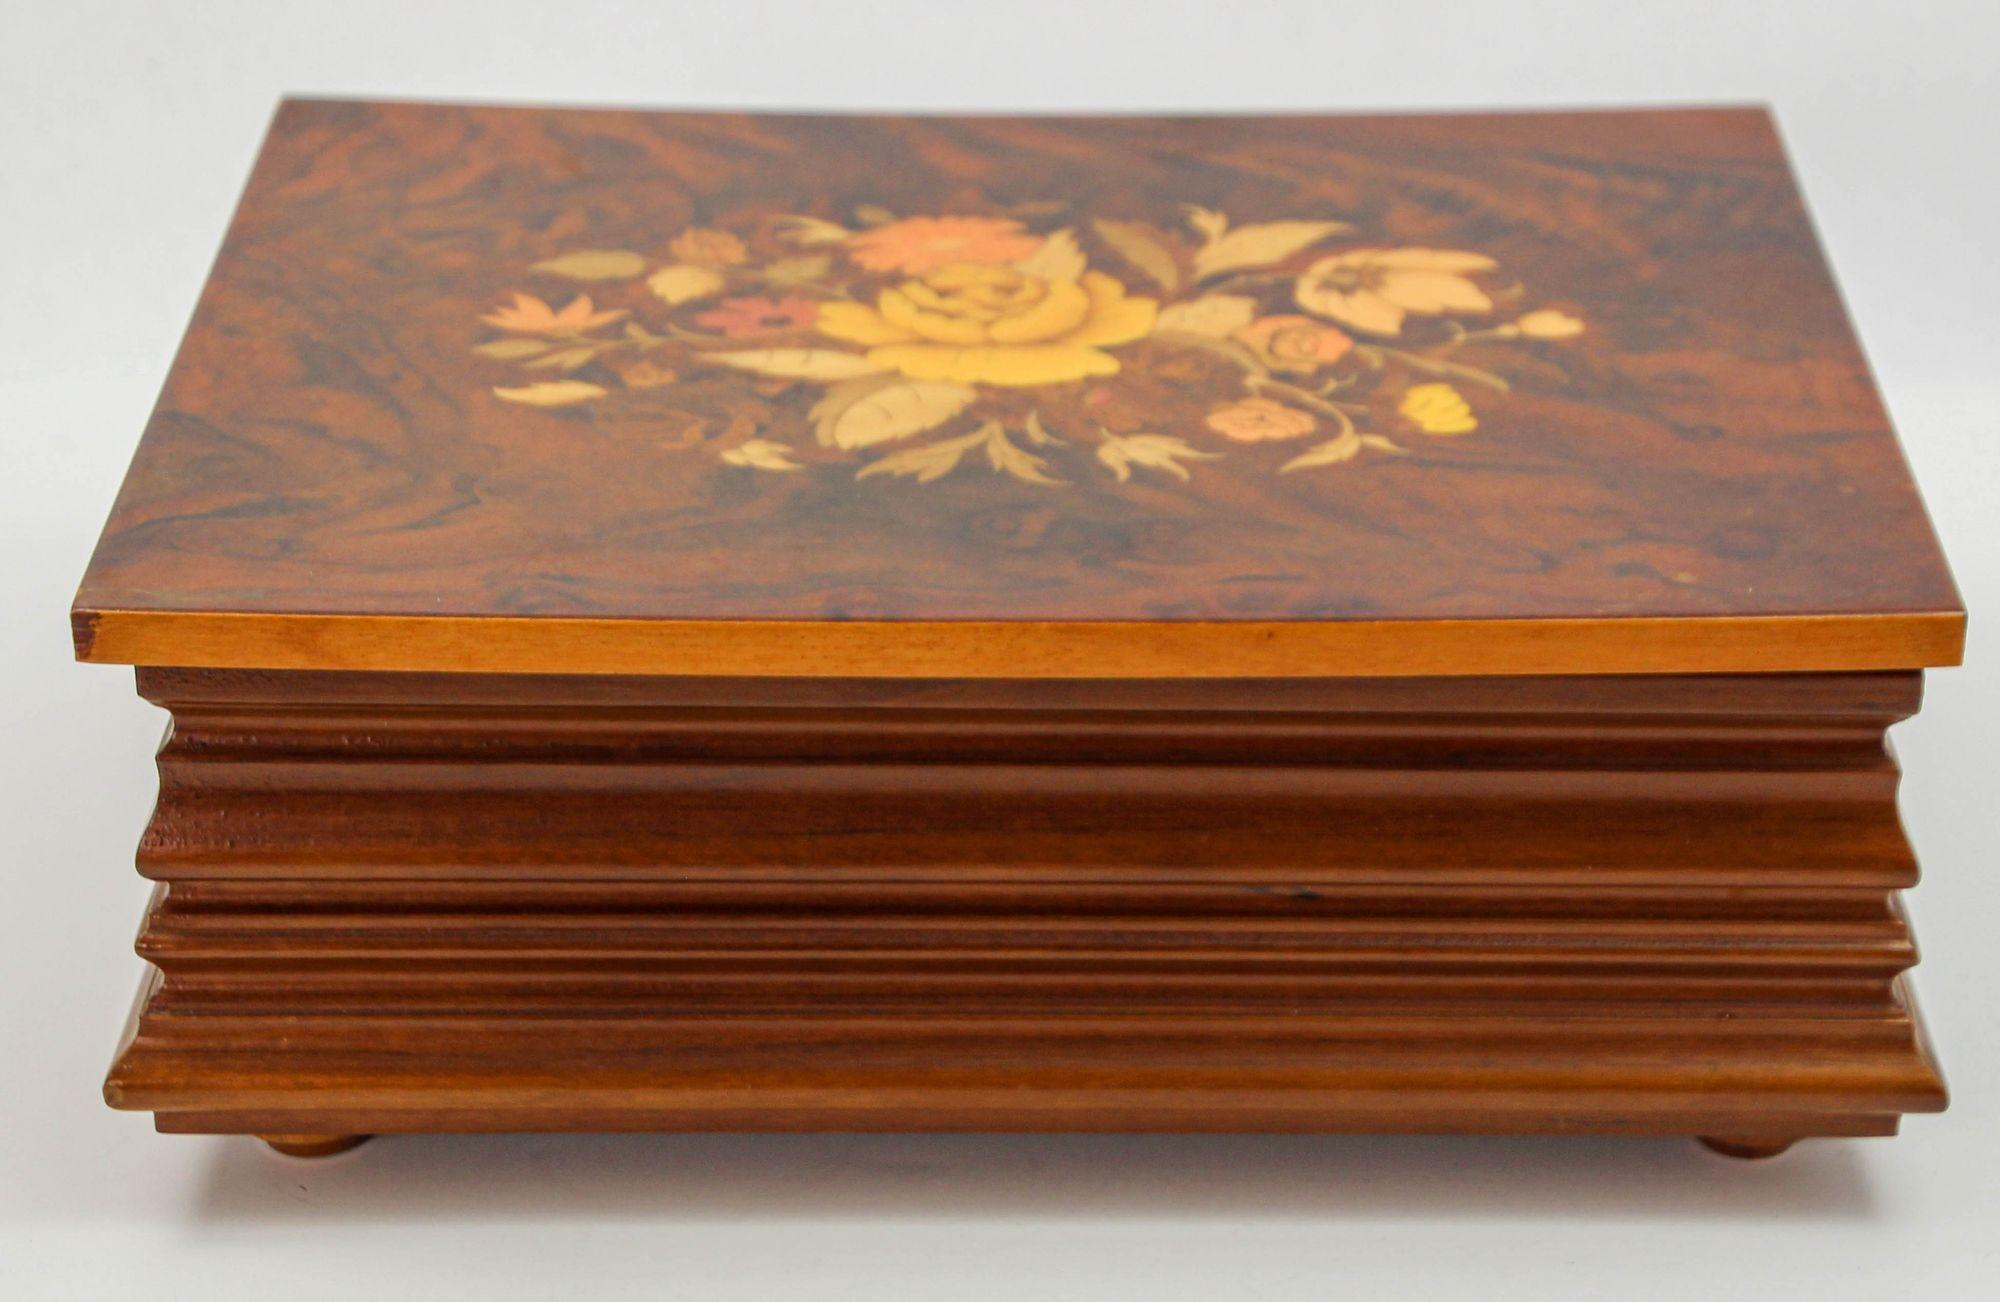 Italian Jewelry Wooden Music Box Made in Italy with Flowers Inlaid Burl Wood Top For Sale